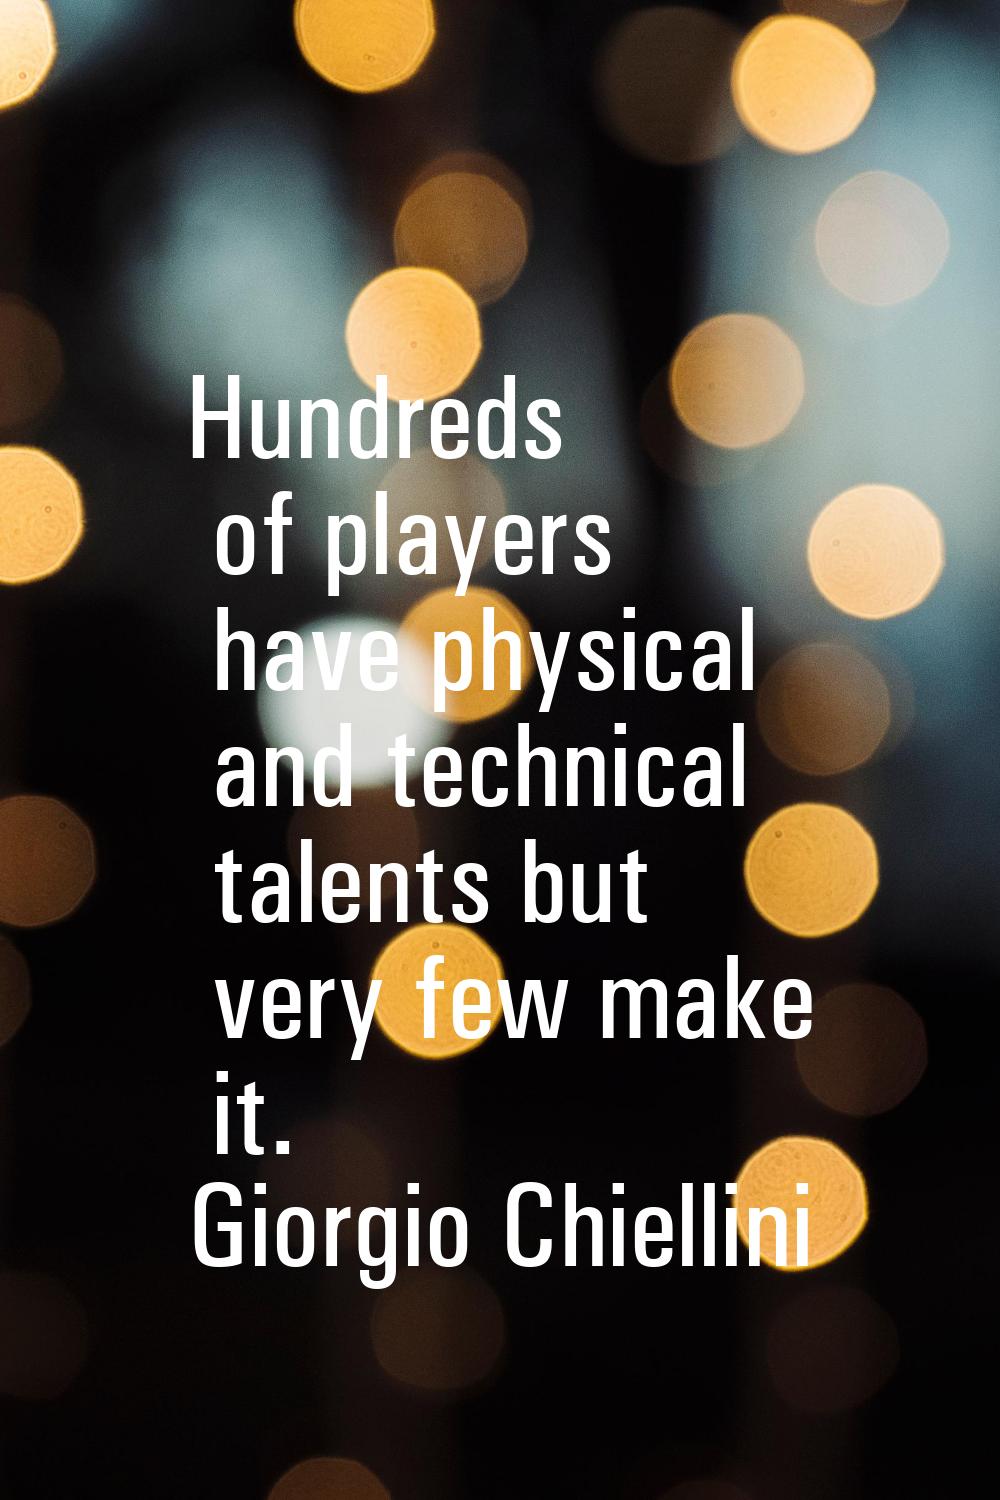 Hundreds of players have physical and technical talents but very few make it.